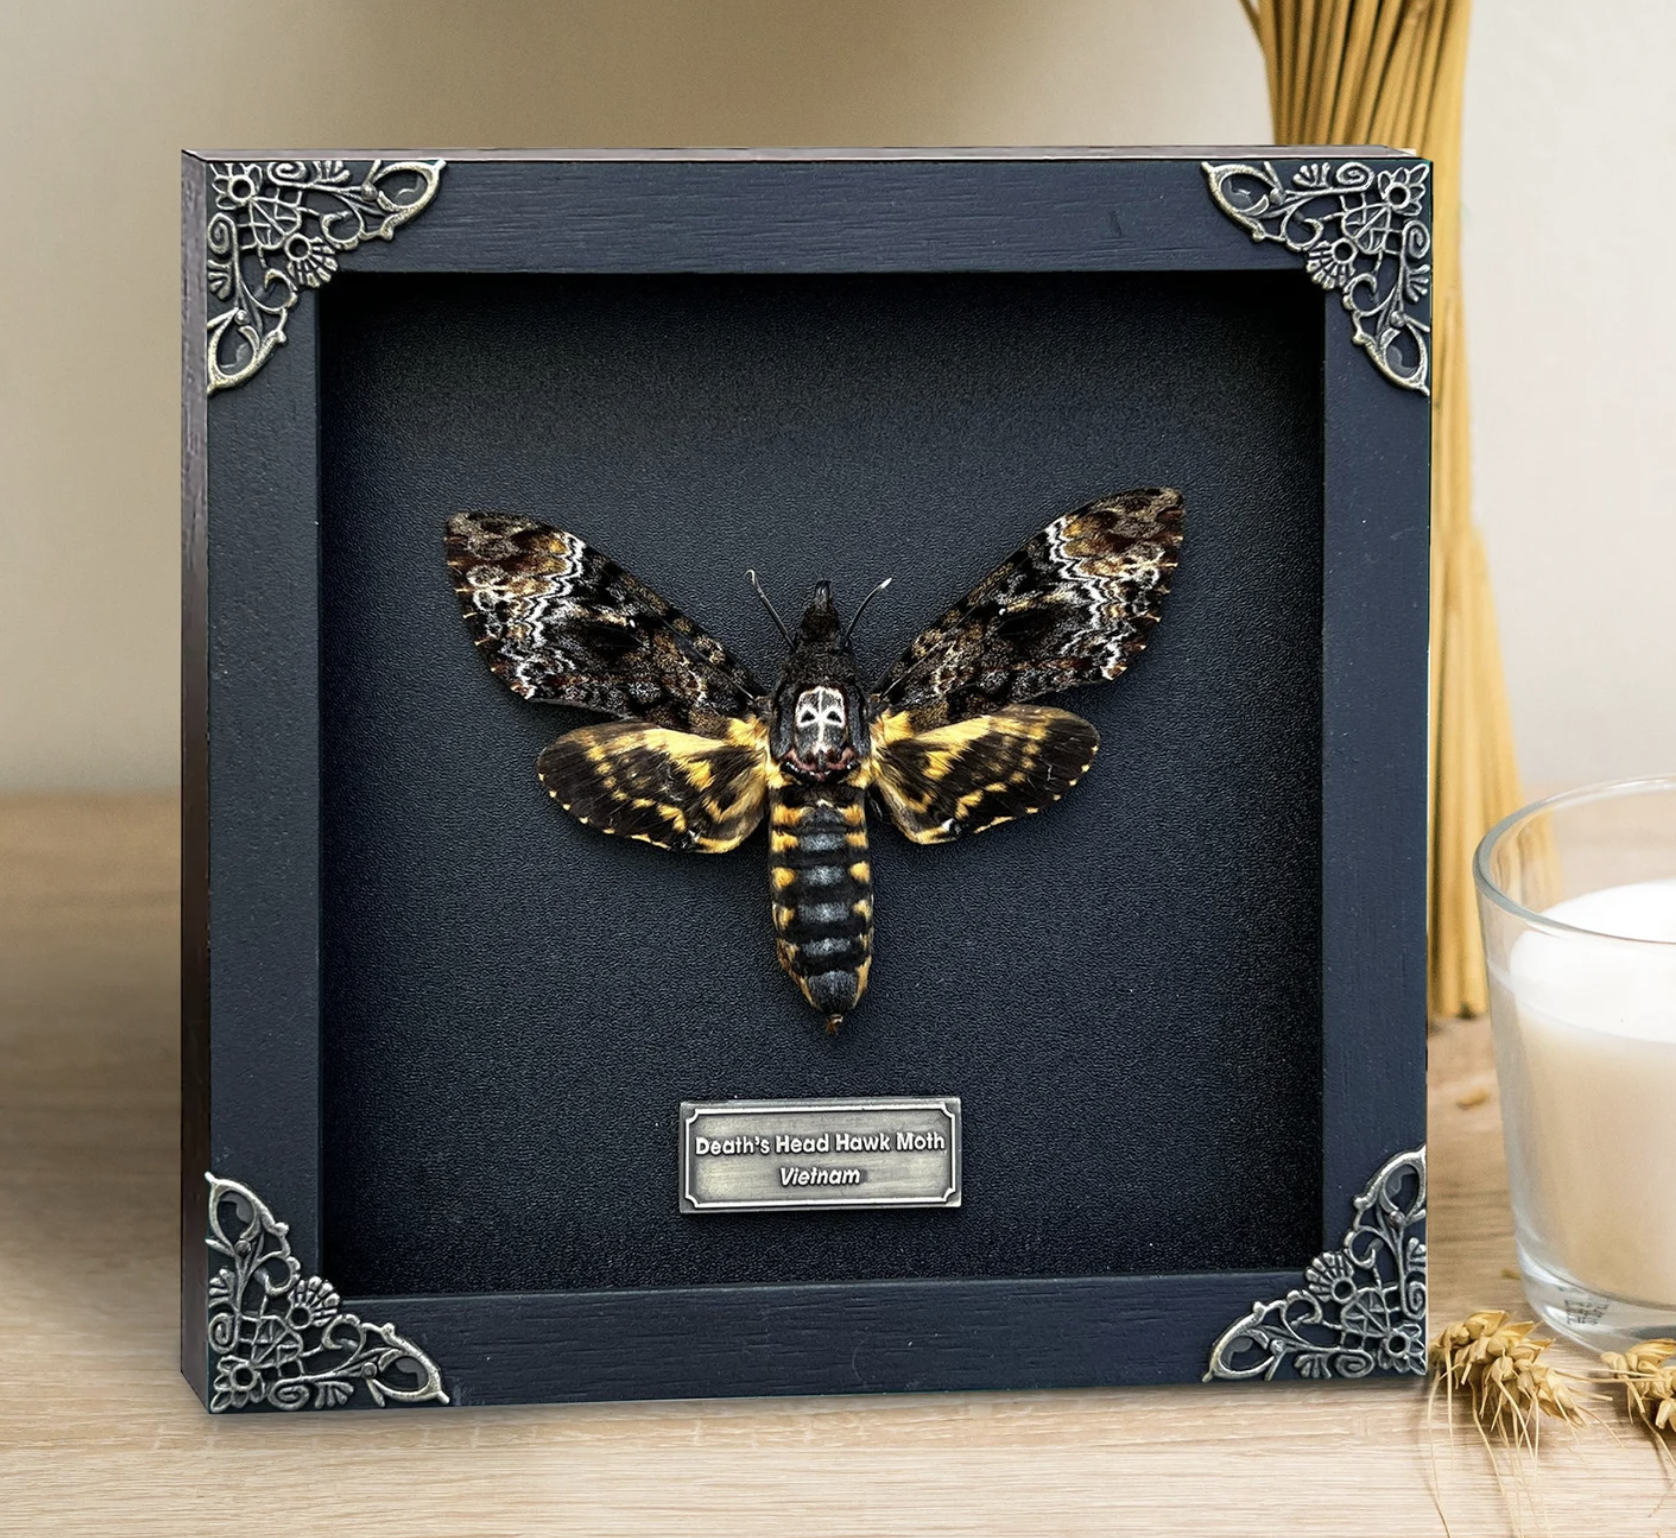 A taxidermied Death's Head Moth on a black ground in a black frame.